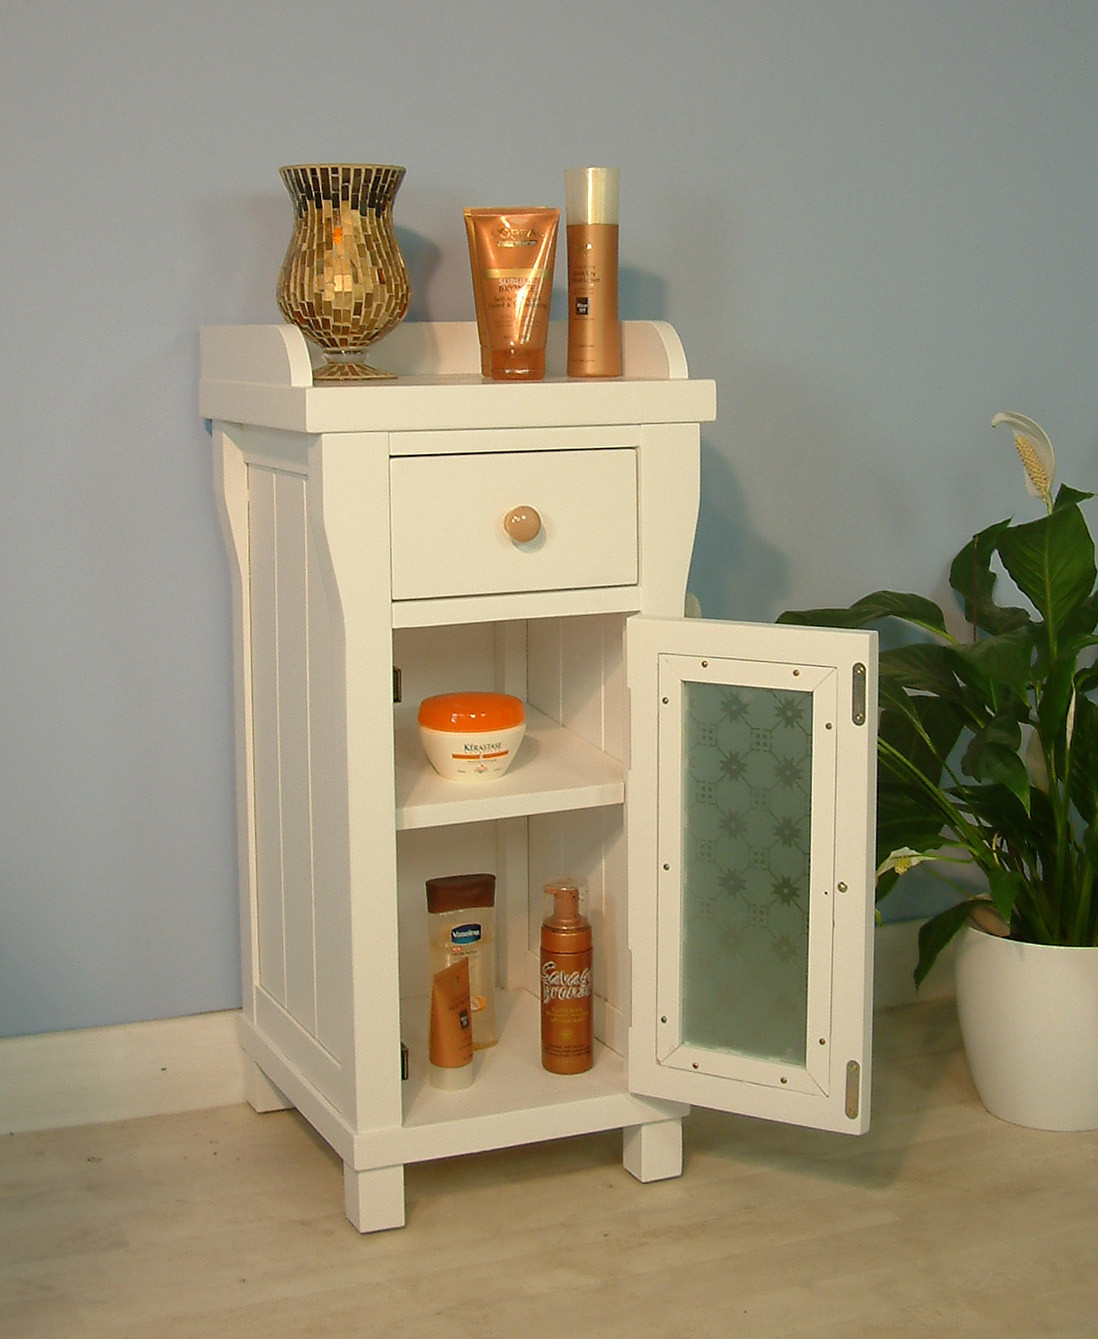 Storage Cabinets For Bathroom
 9 small bathroom storage ideas you cant afford to overlook